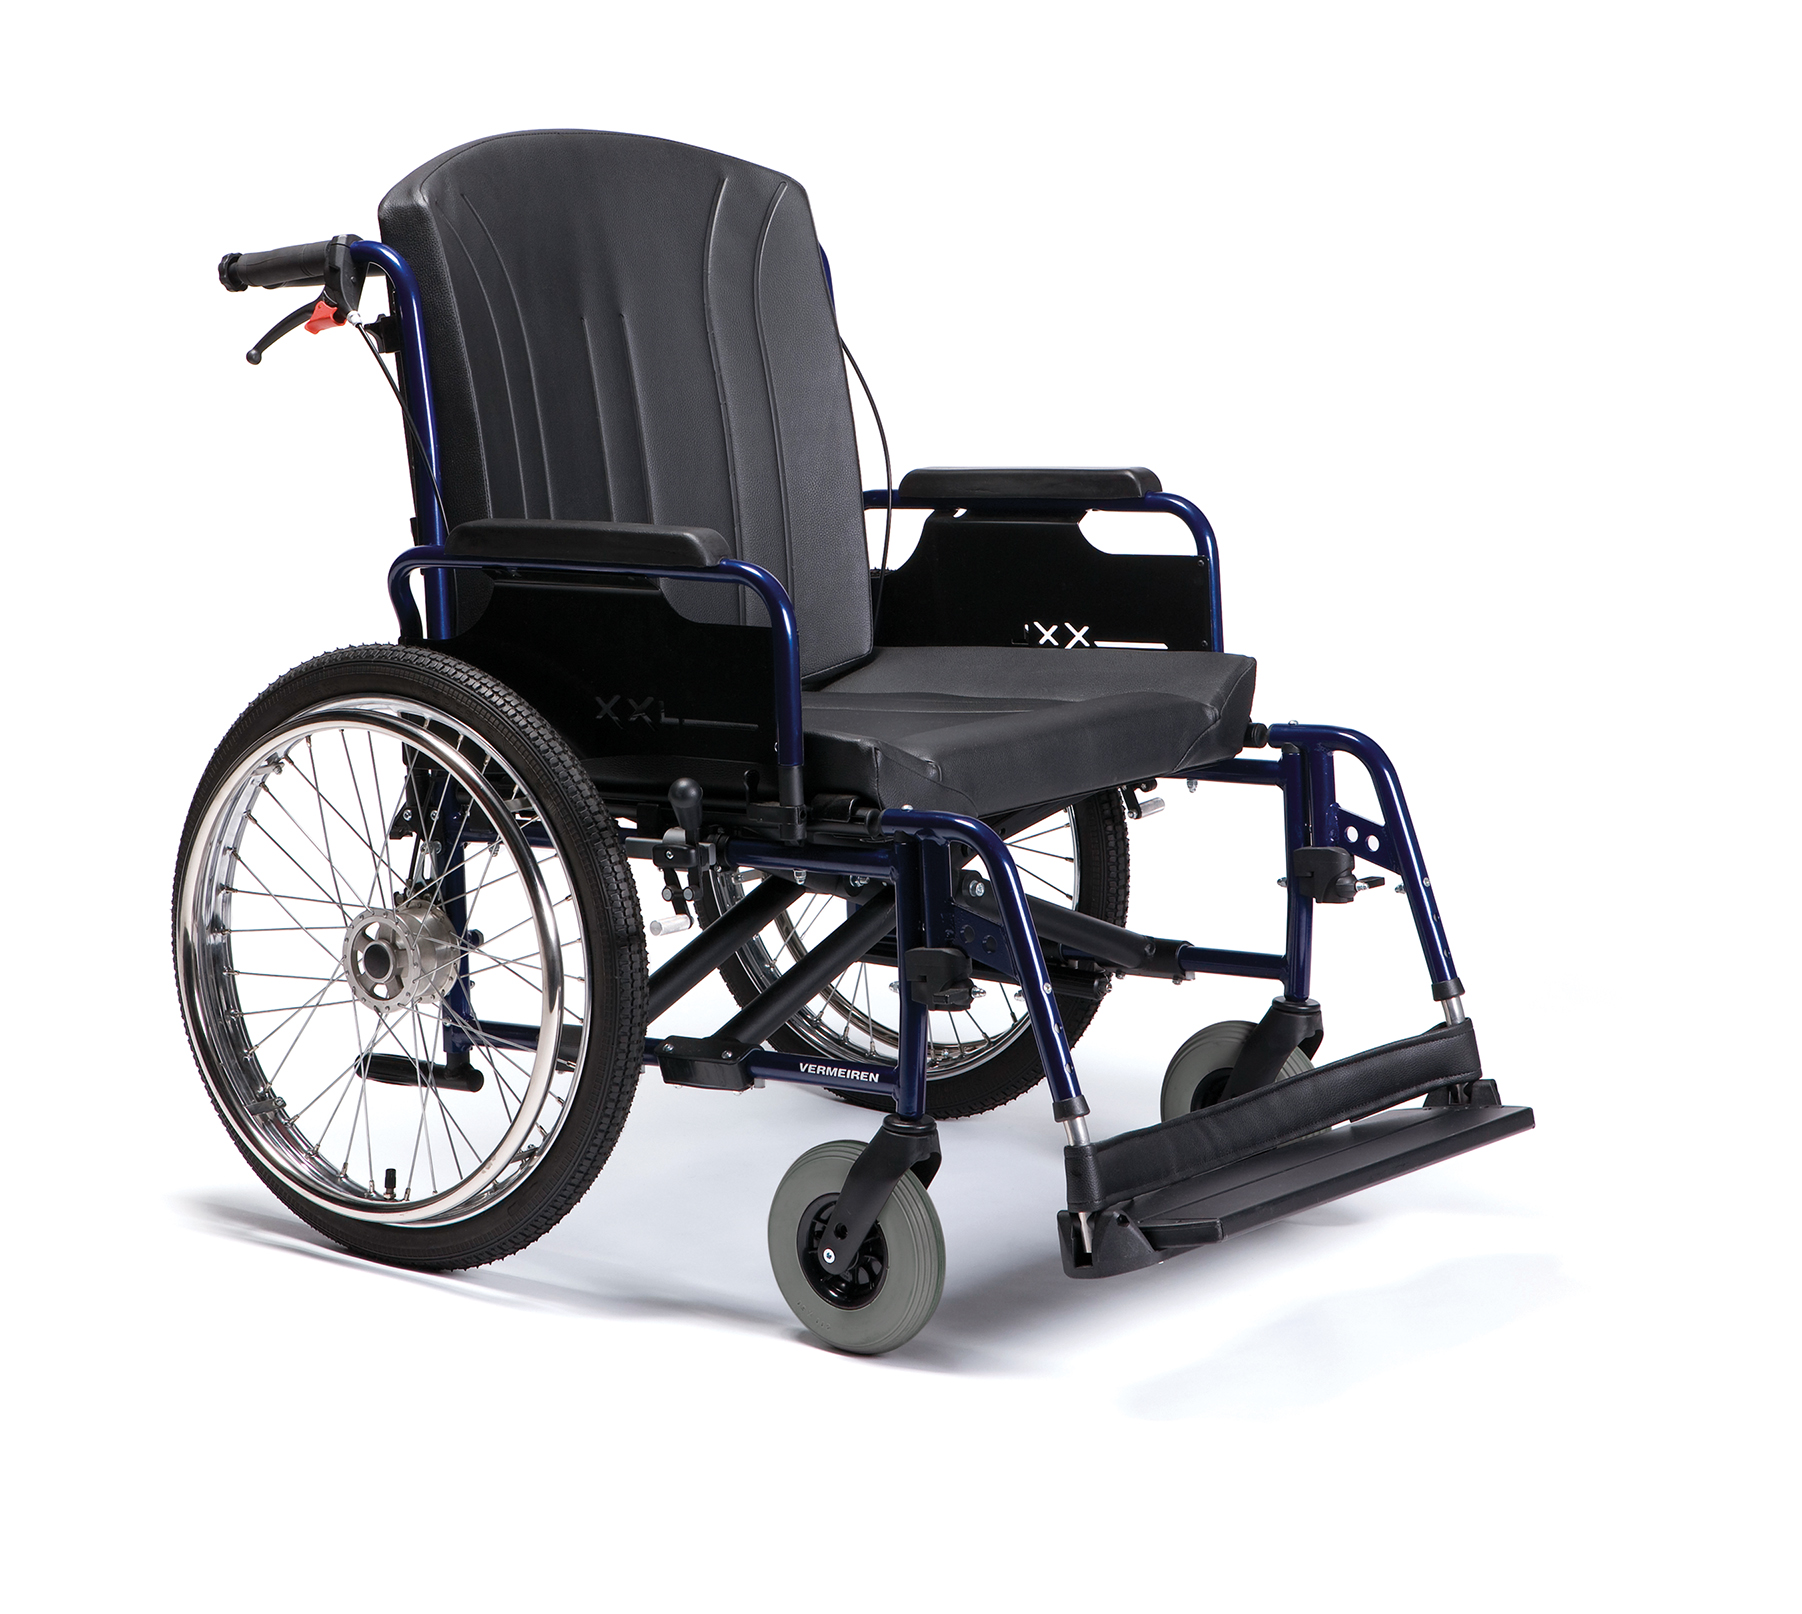 Manual & Electric Wheelchairs For Overweight Users